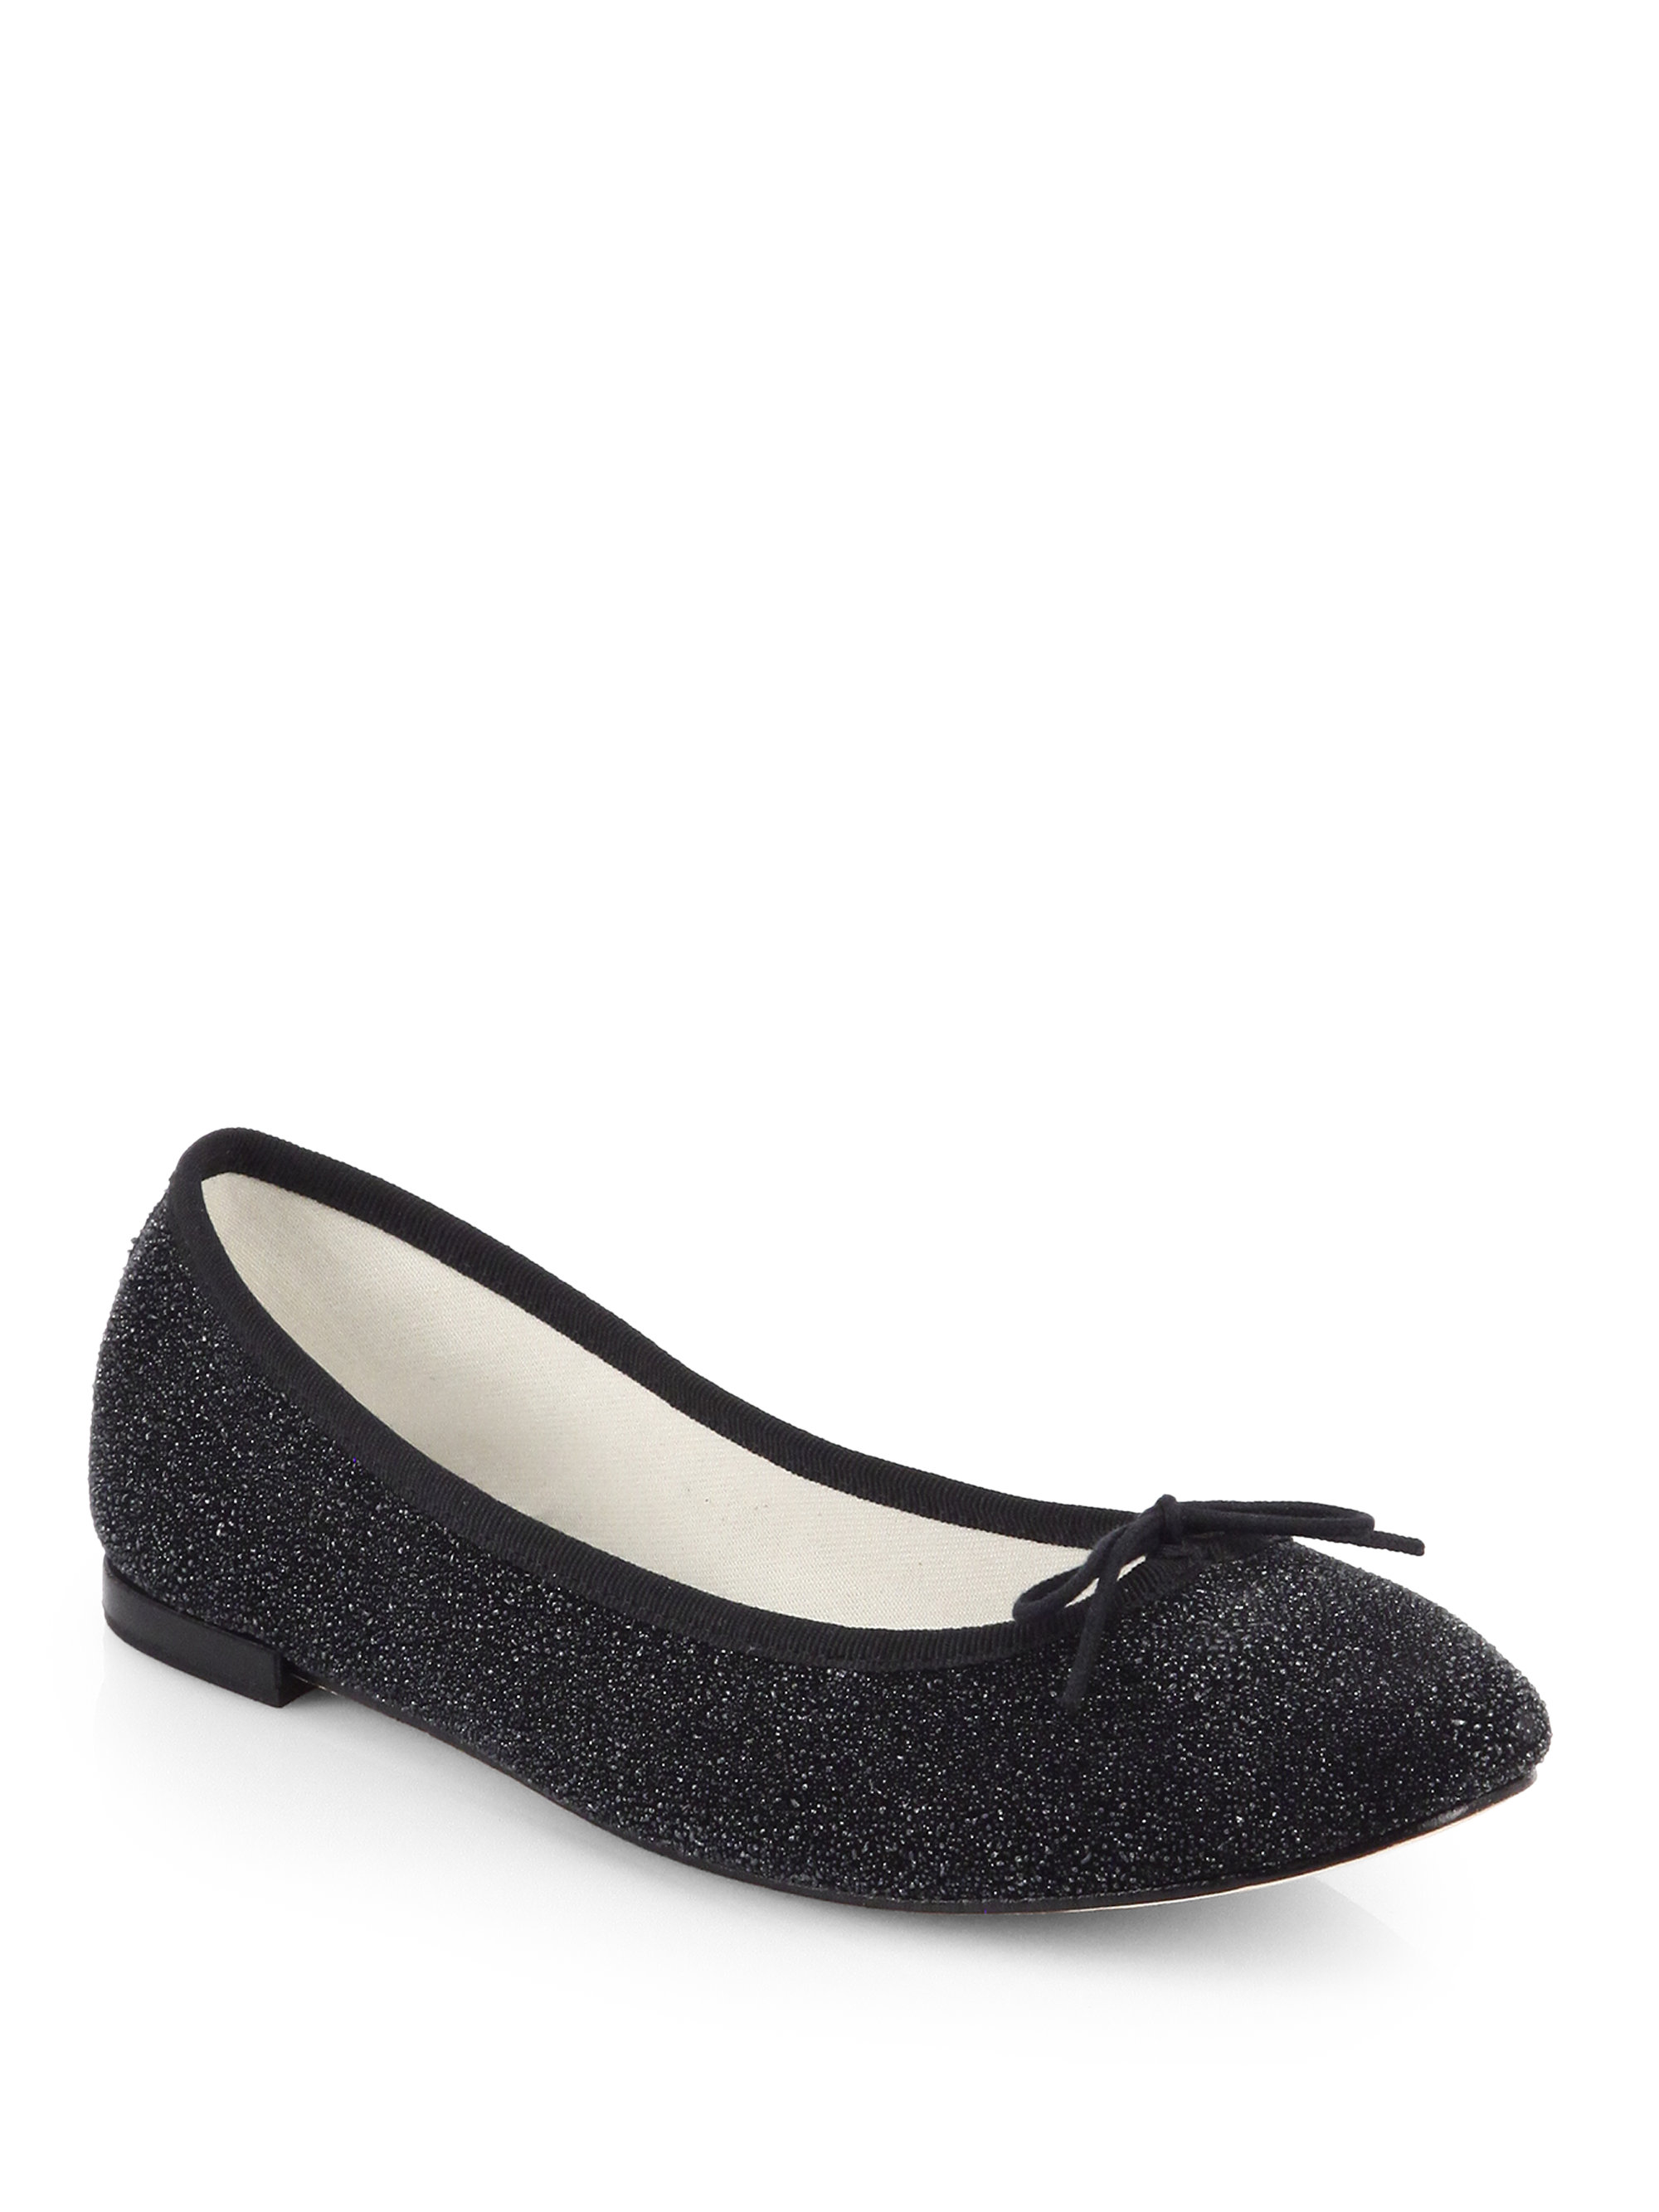 Repetto Sparkle-Coated Suede Ballet Flats in Black | Lyst